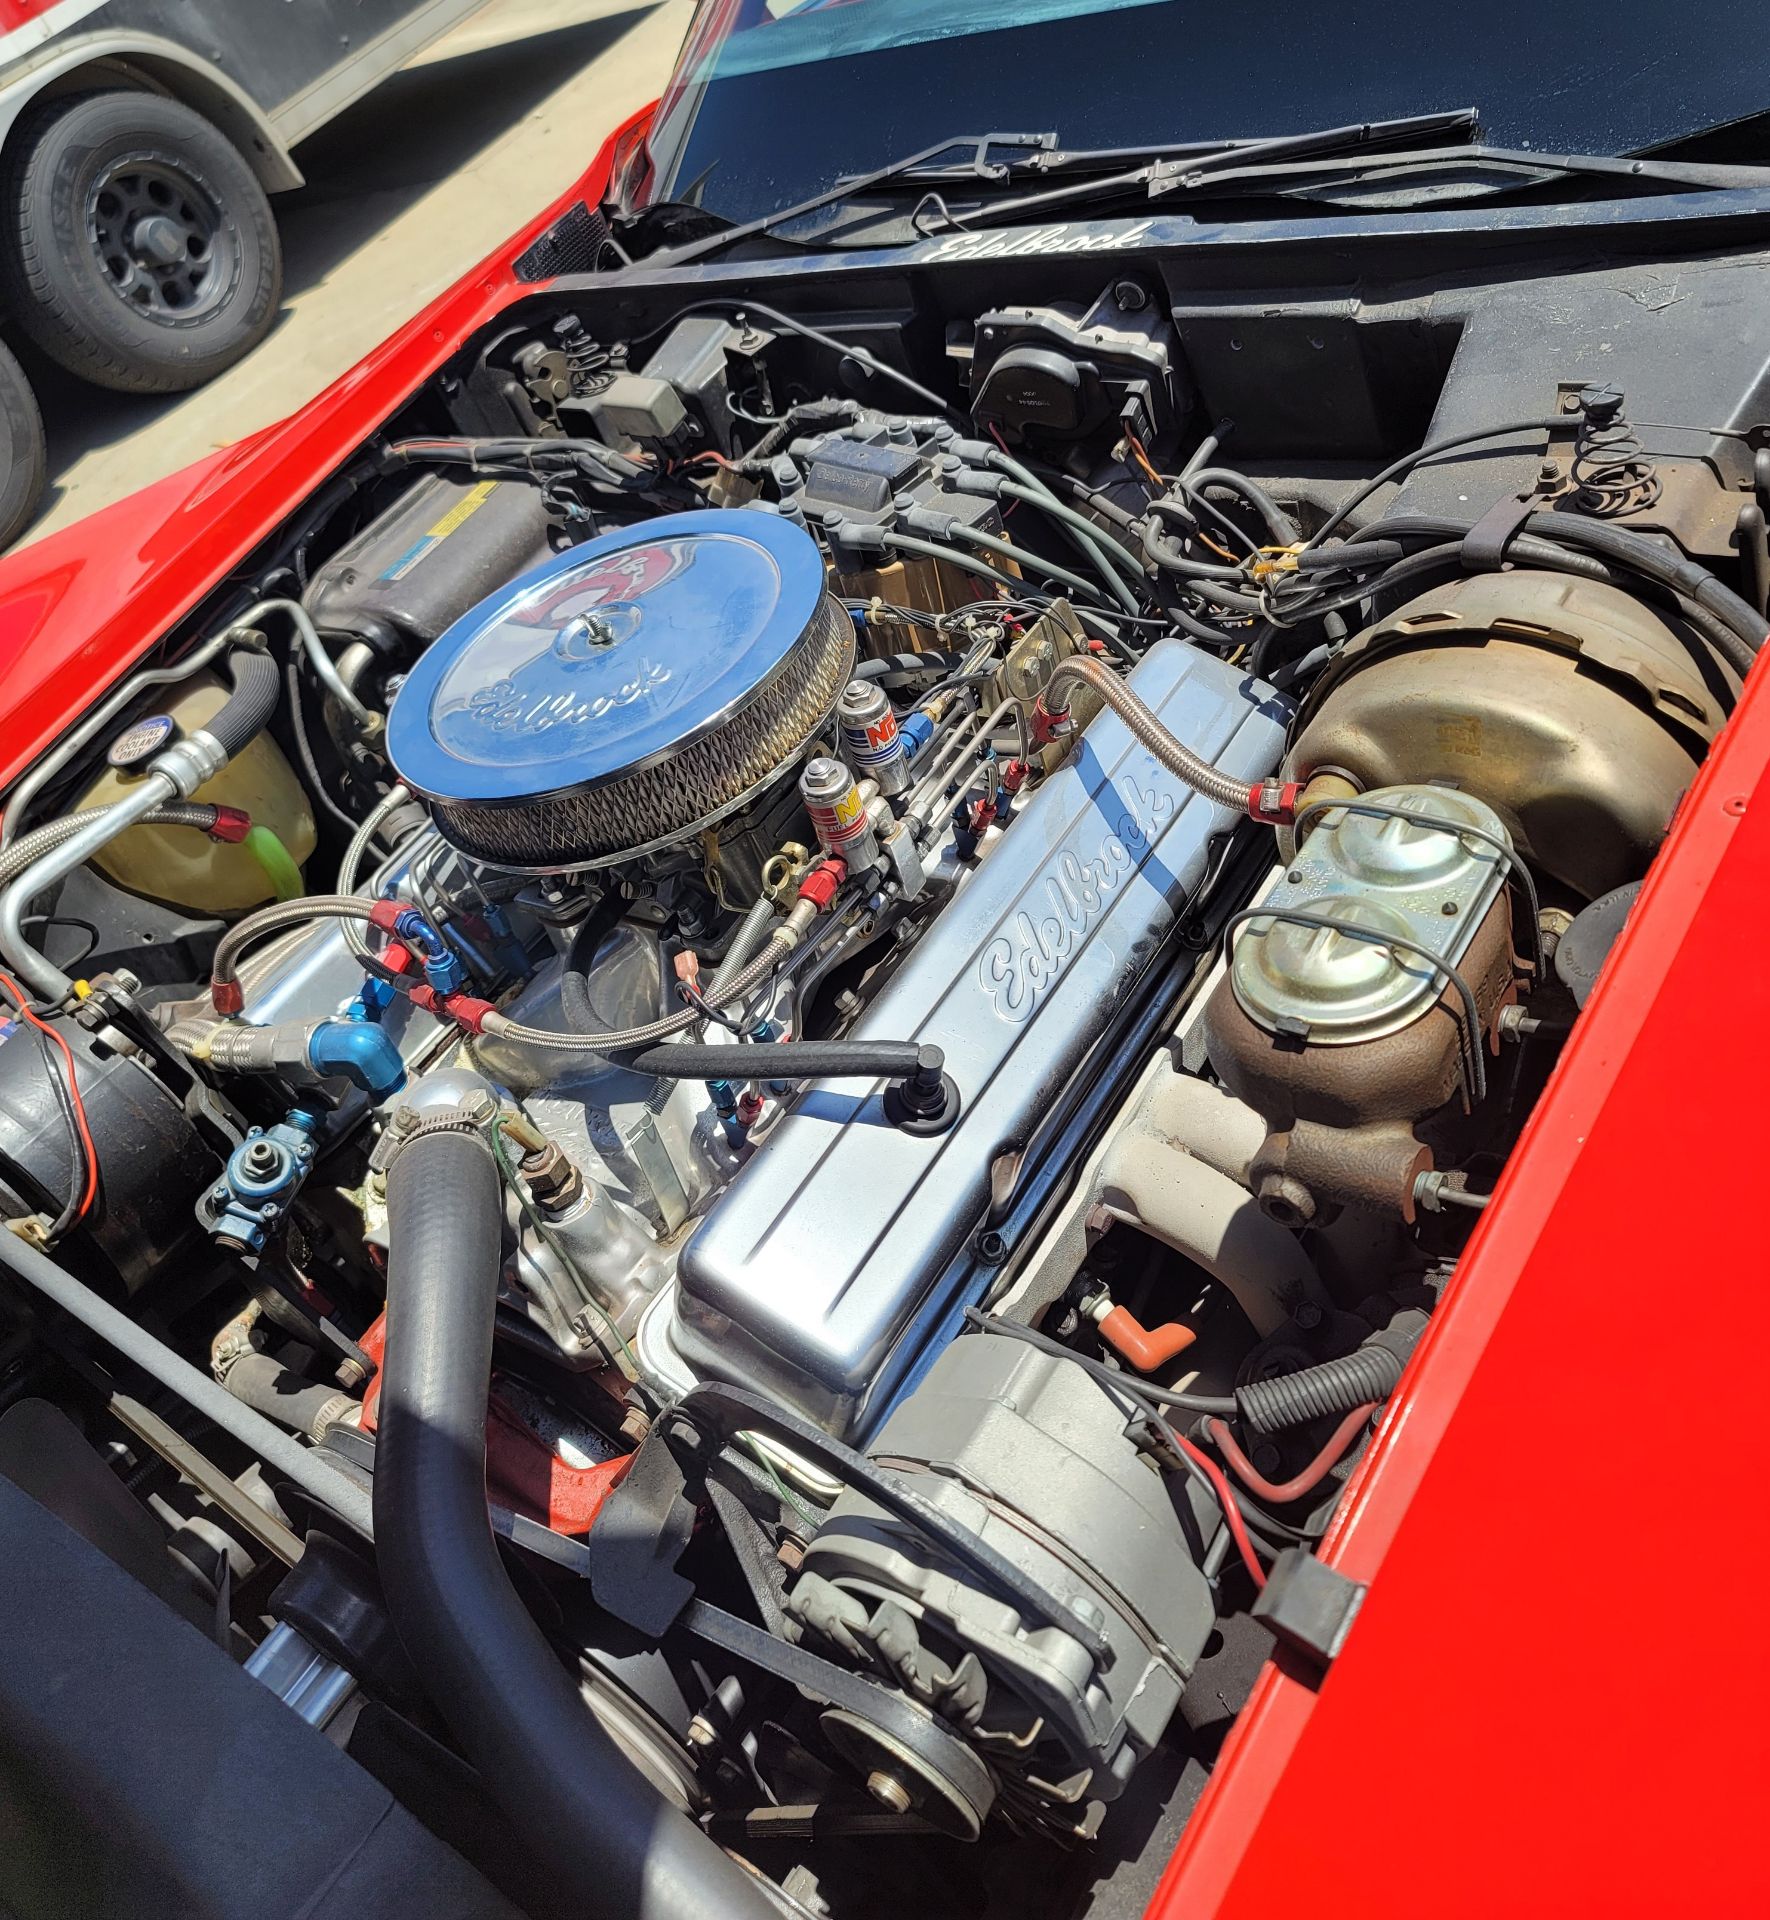 1980 CHEVROLET CORVETTE, WAS VIC EDELBROCK'S PERSONAL CAR BOUGHT FOR R&D, RED INTERIOR, TITLE ONLY. - Image 28 of 70